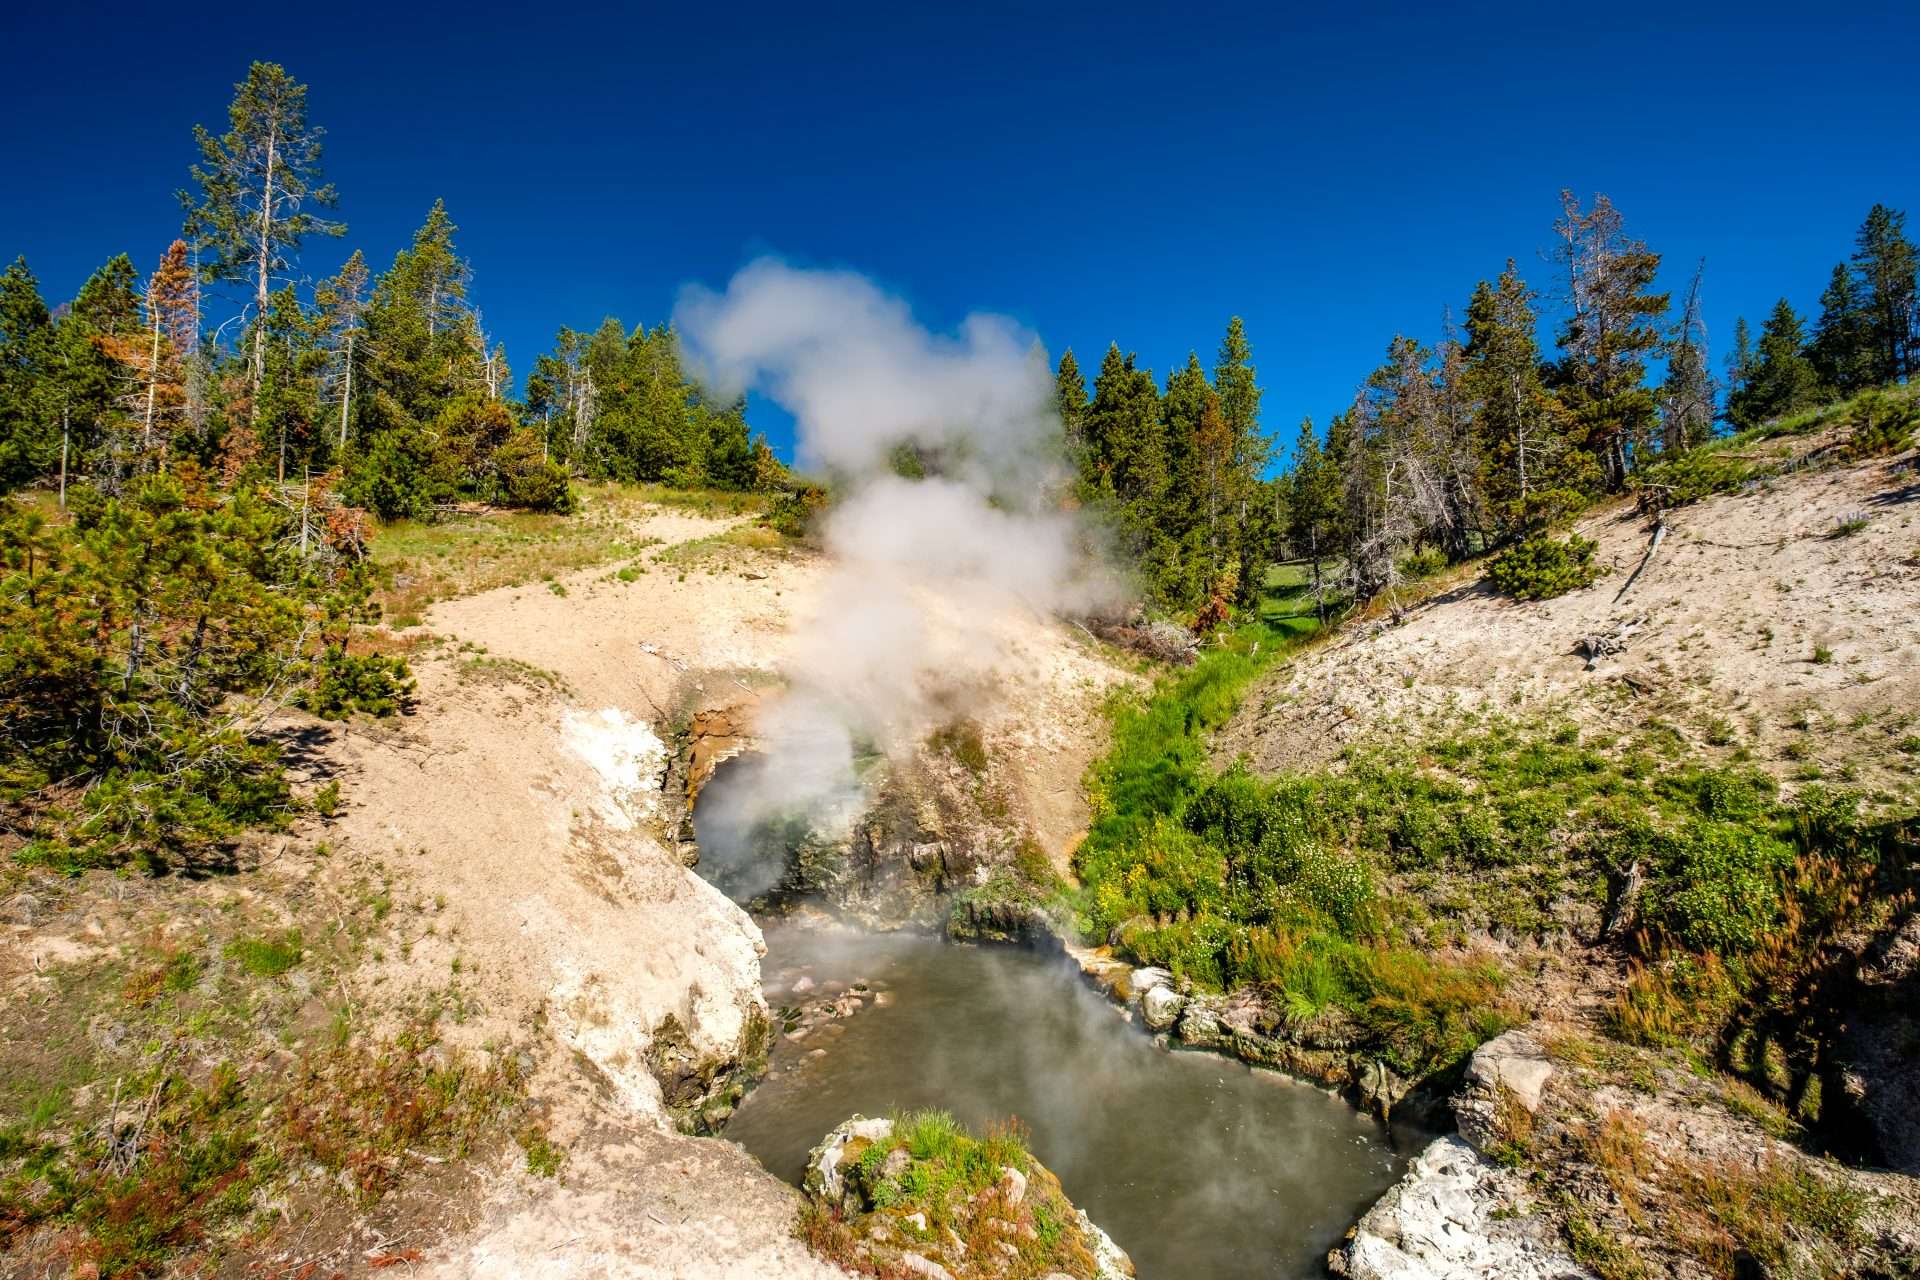 Hot boiling mud at Mud Volcano area in Yellowstone National Park, Wyoming, USA